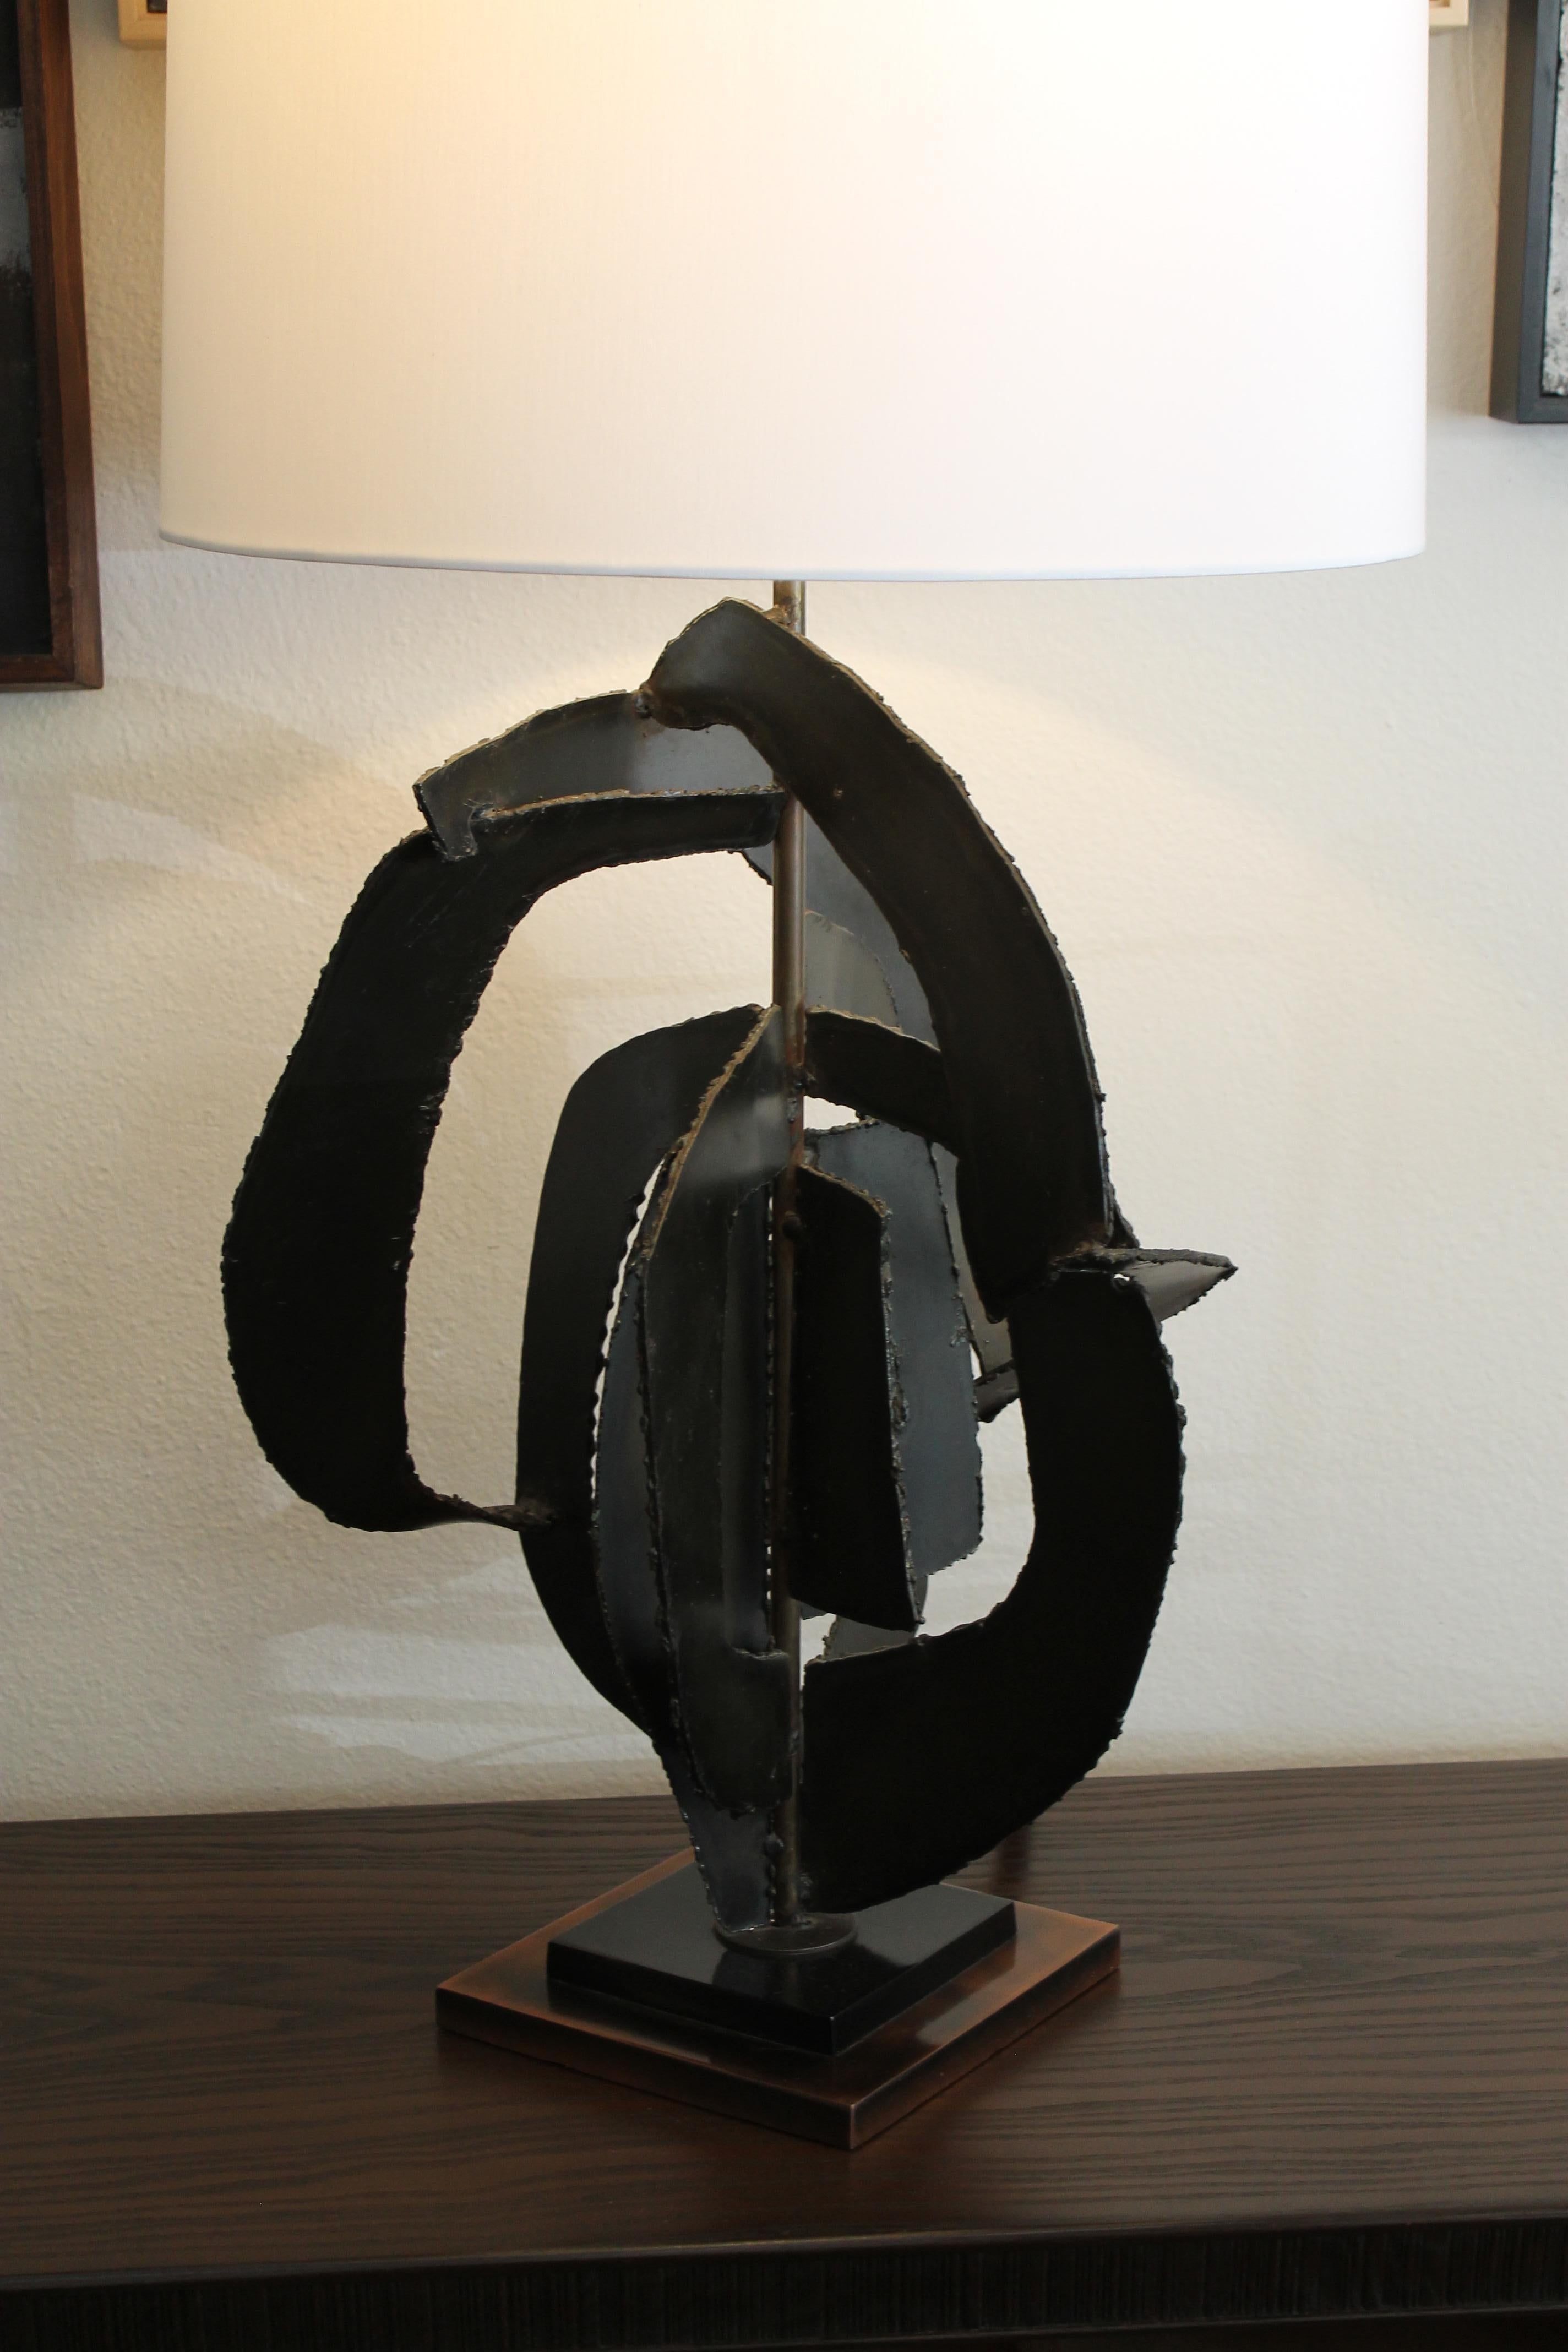 This Brutalist-style lamp was designed by Richard Barr for the Laurel Lamp Company, Newark, N.J. This lamp was one of Barr’s “Studio Collection”. Lamp consists of torch-cut metal on a bronze square base. Lamp is 38.5